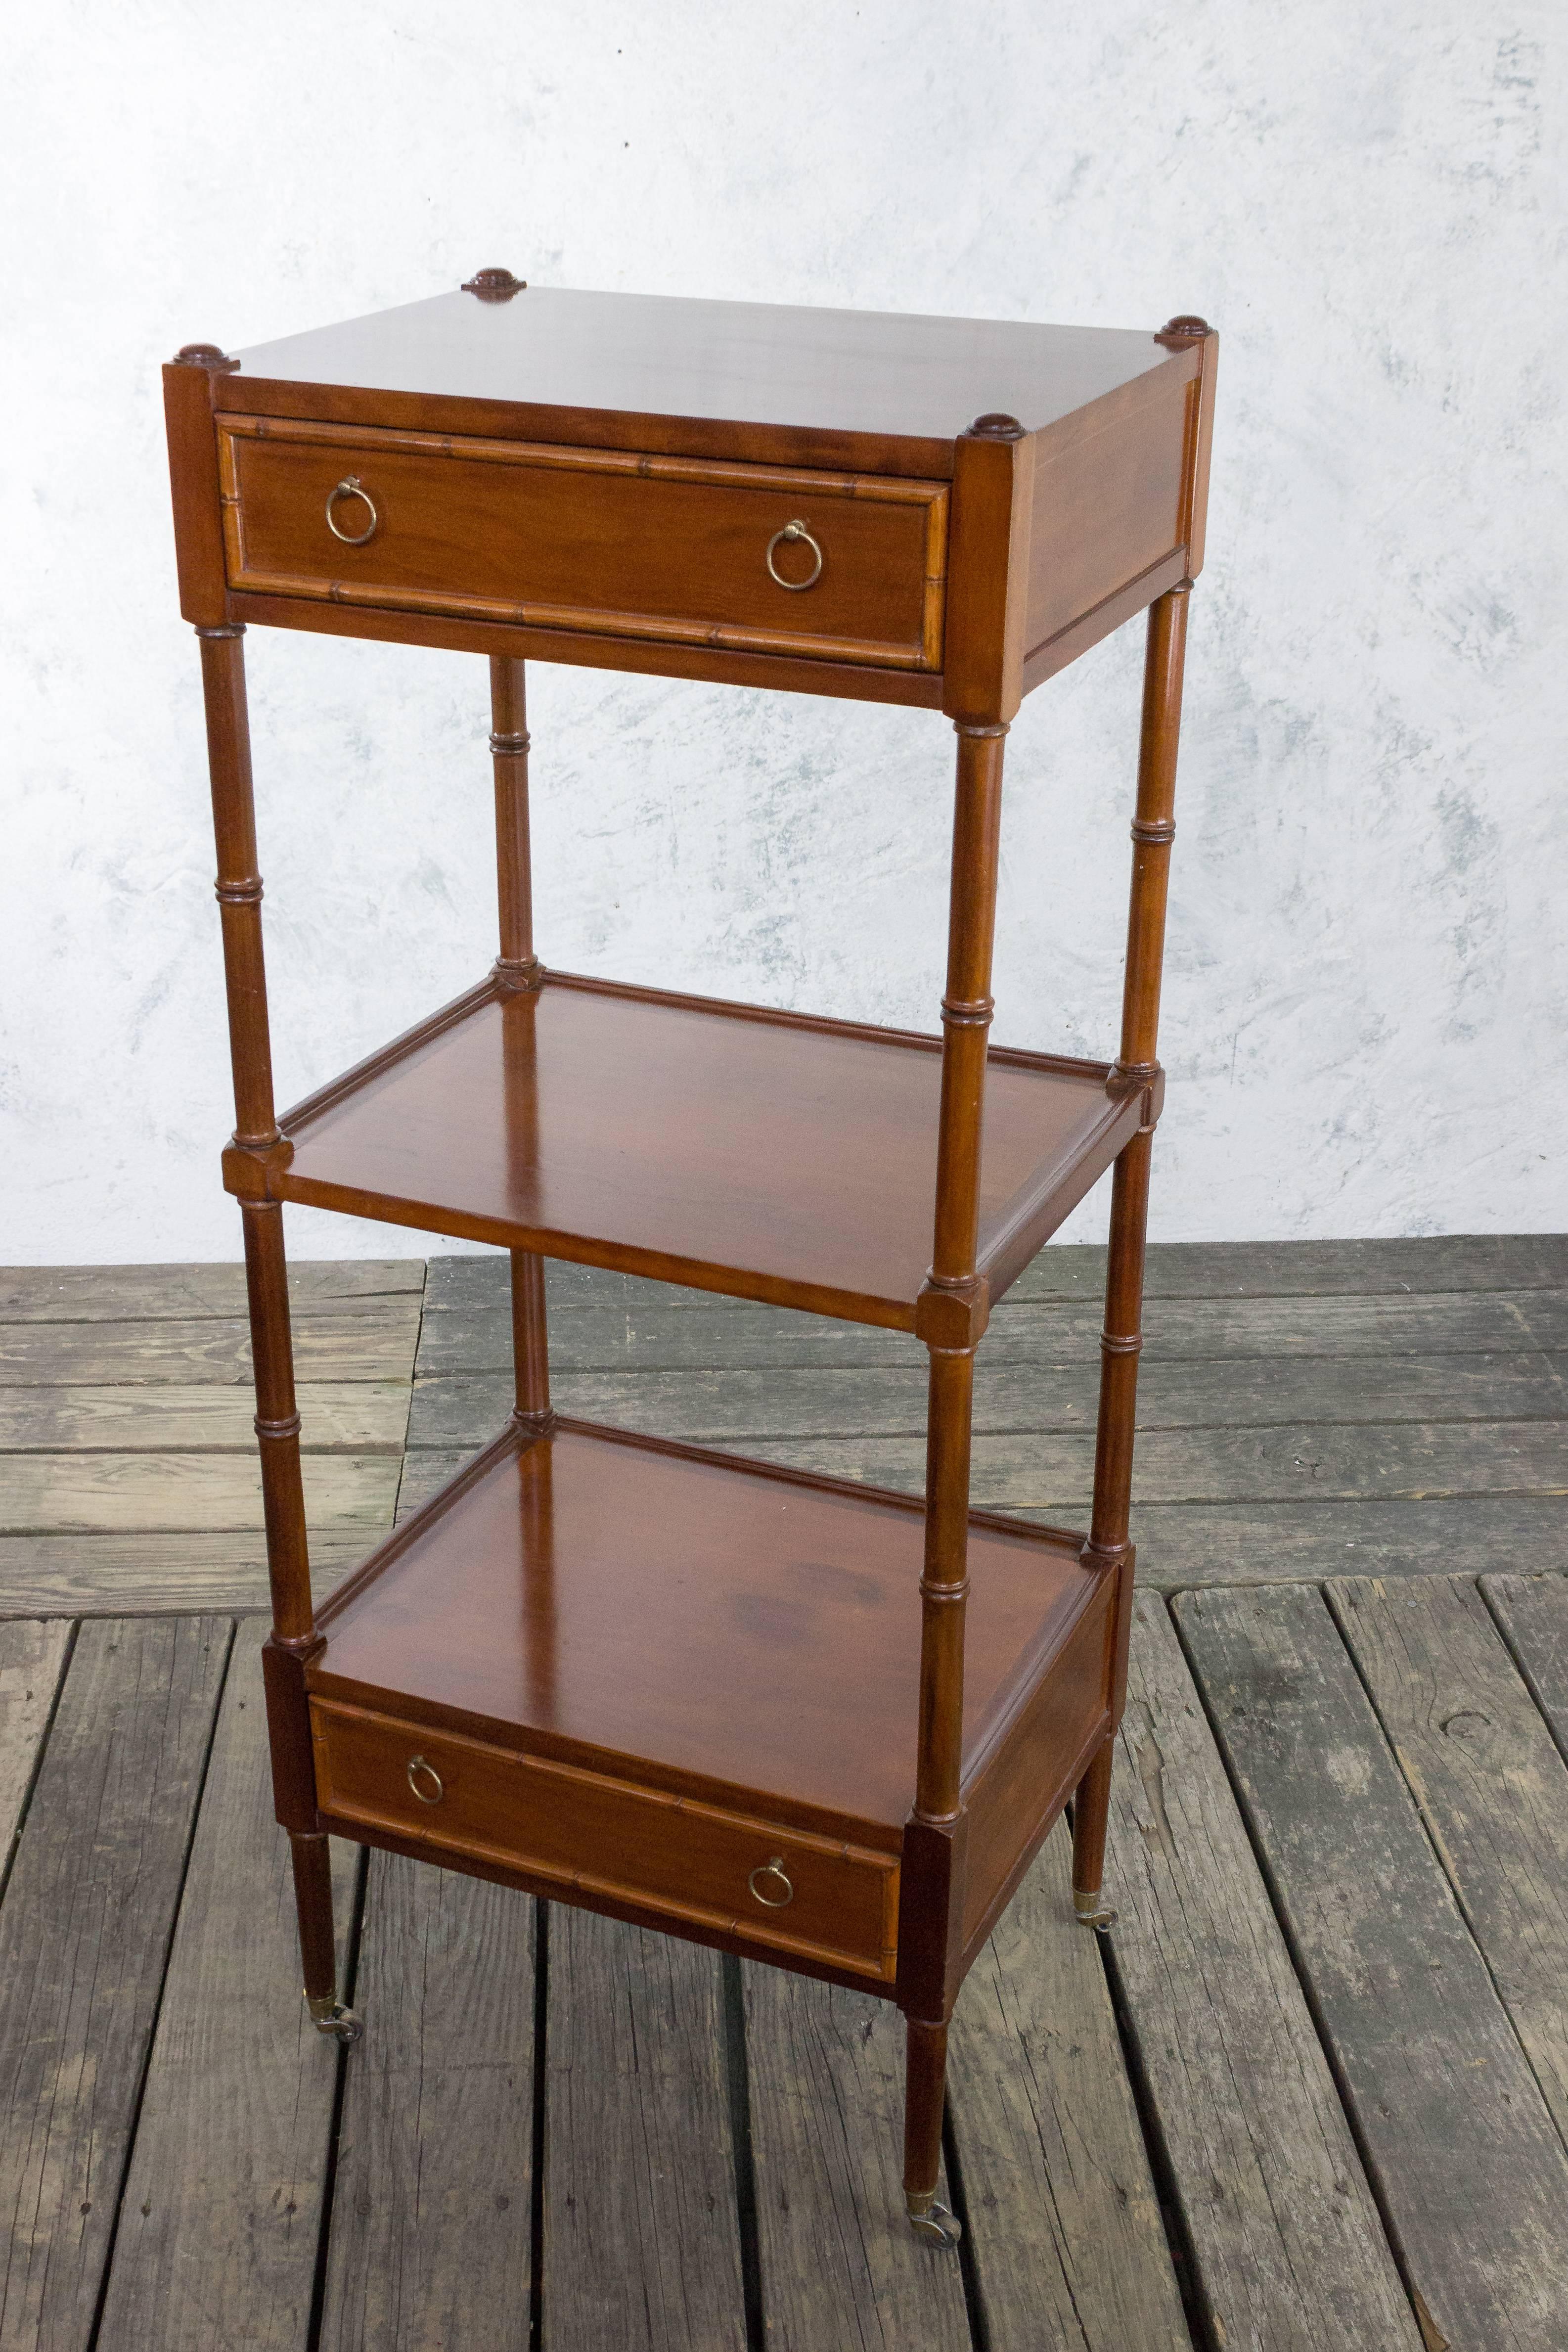 This American 1940s mahogany etagere features three tiers with drawers on two of the tiers. The brass pulls and sabot draw attention to the detailed carvings on the drawers and legs, adding a touch of elegance to its overall appearance. Equipped